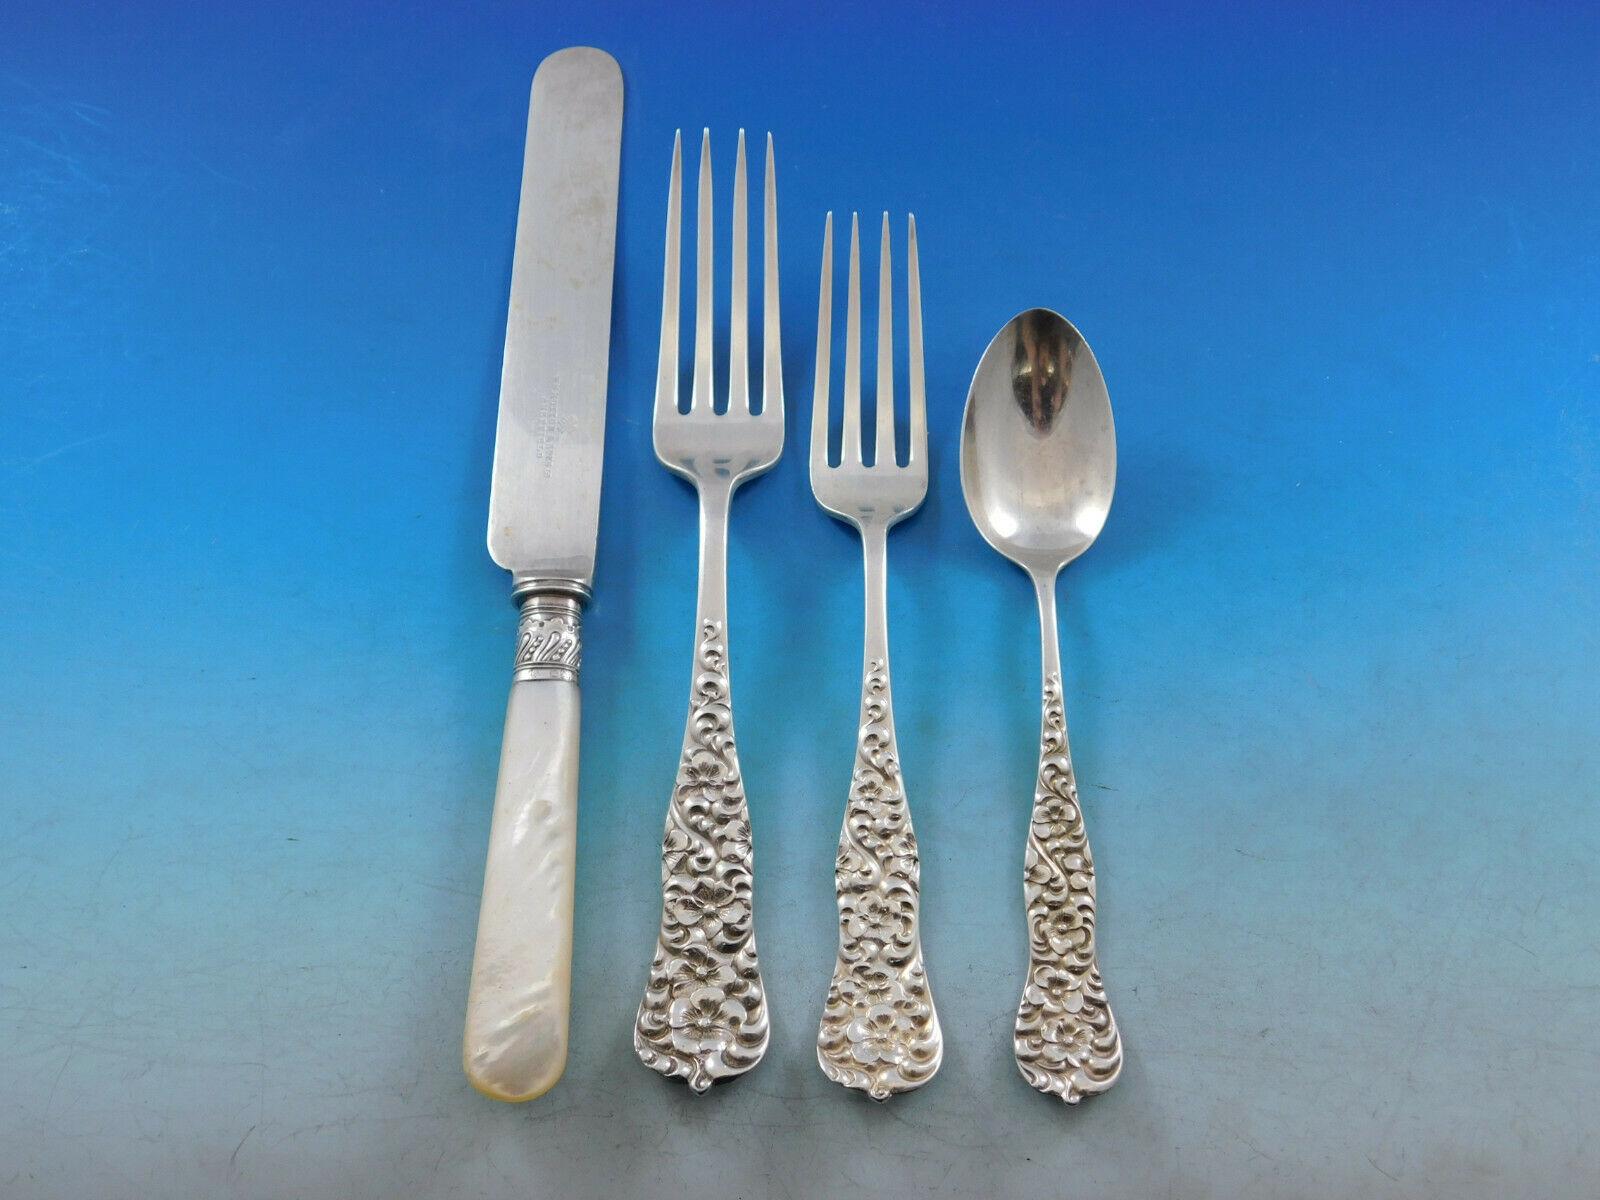 Dinner Size Rococo by Dominick & Haff, circa 1888, Sterling silver Flatware set, 72 pieces. This scarce set includes:

12 Dinner knives, 9 3/8